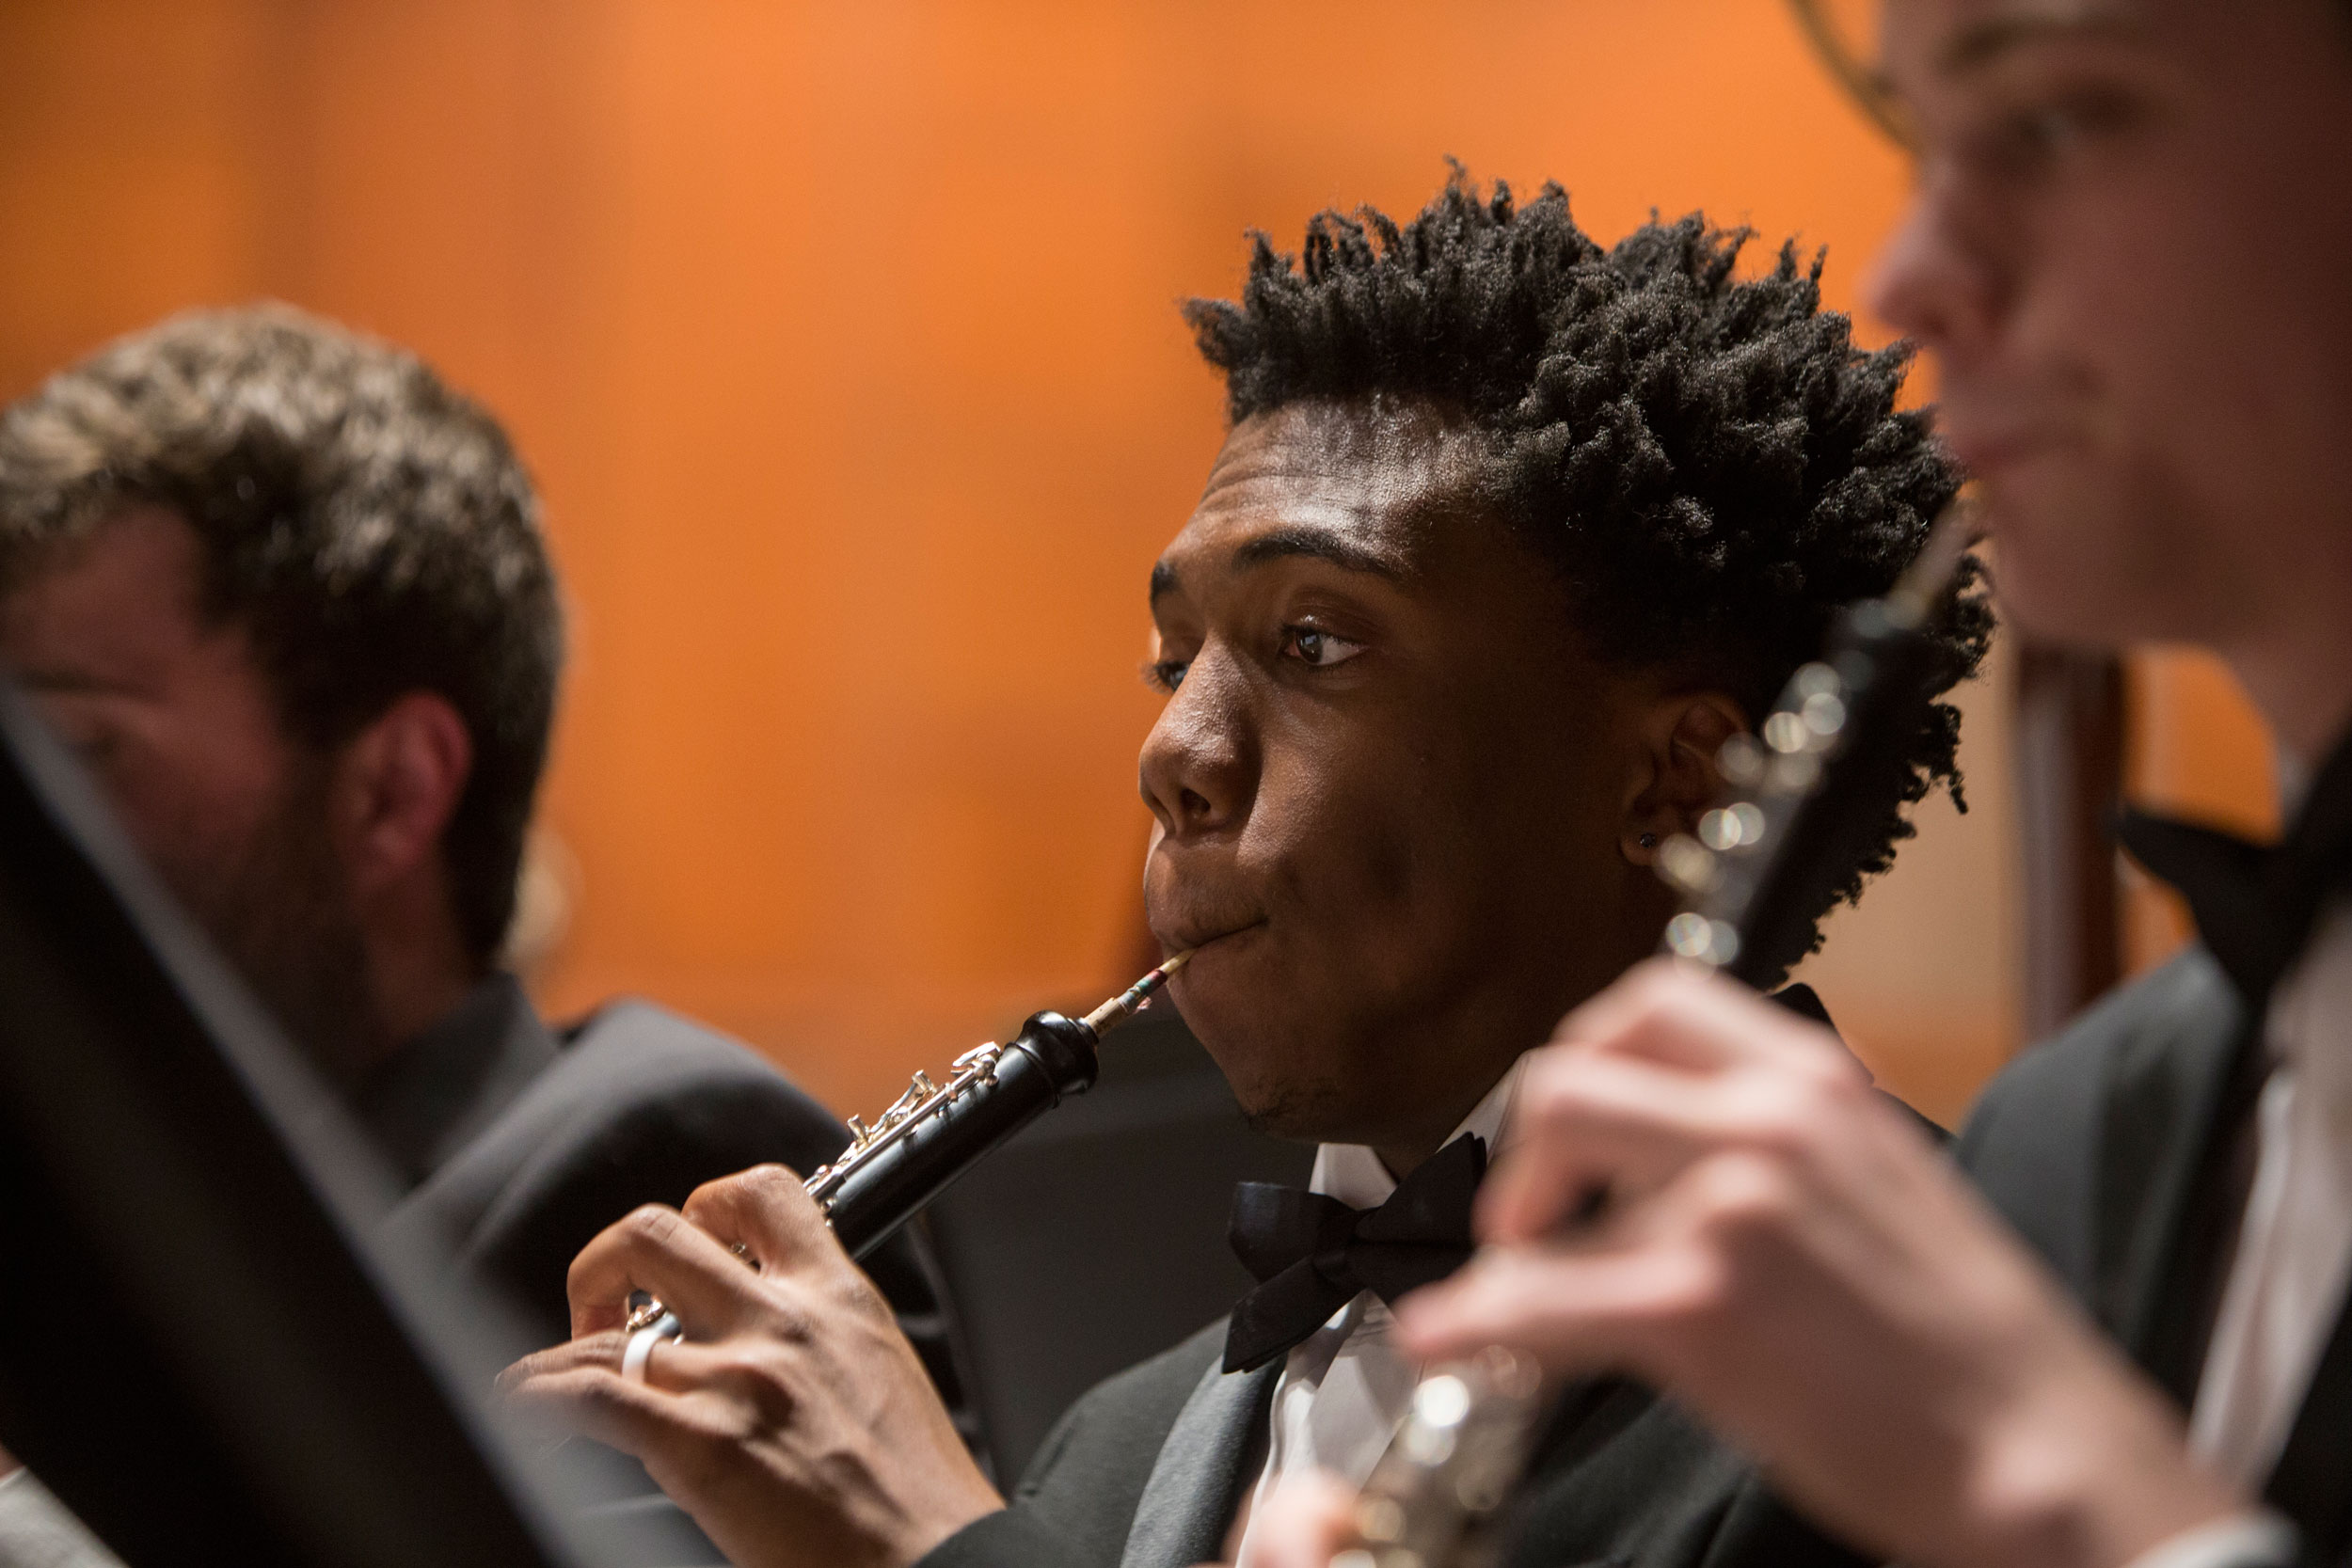 A CCM student plays oboe in an ensemble